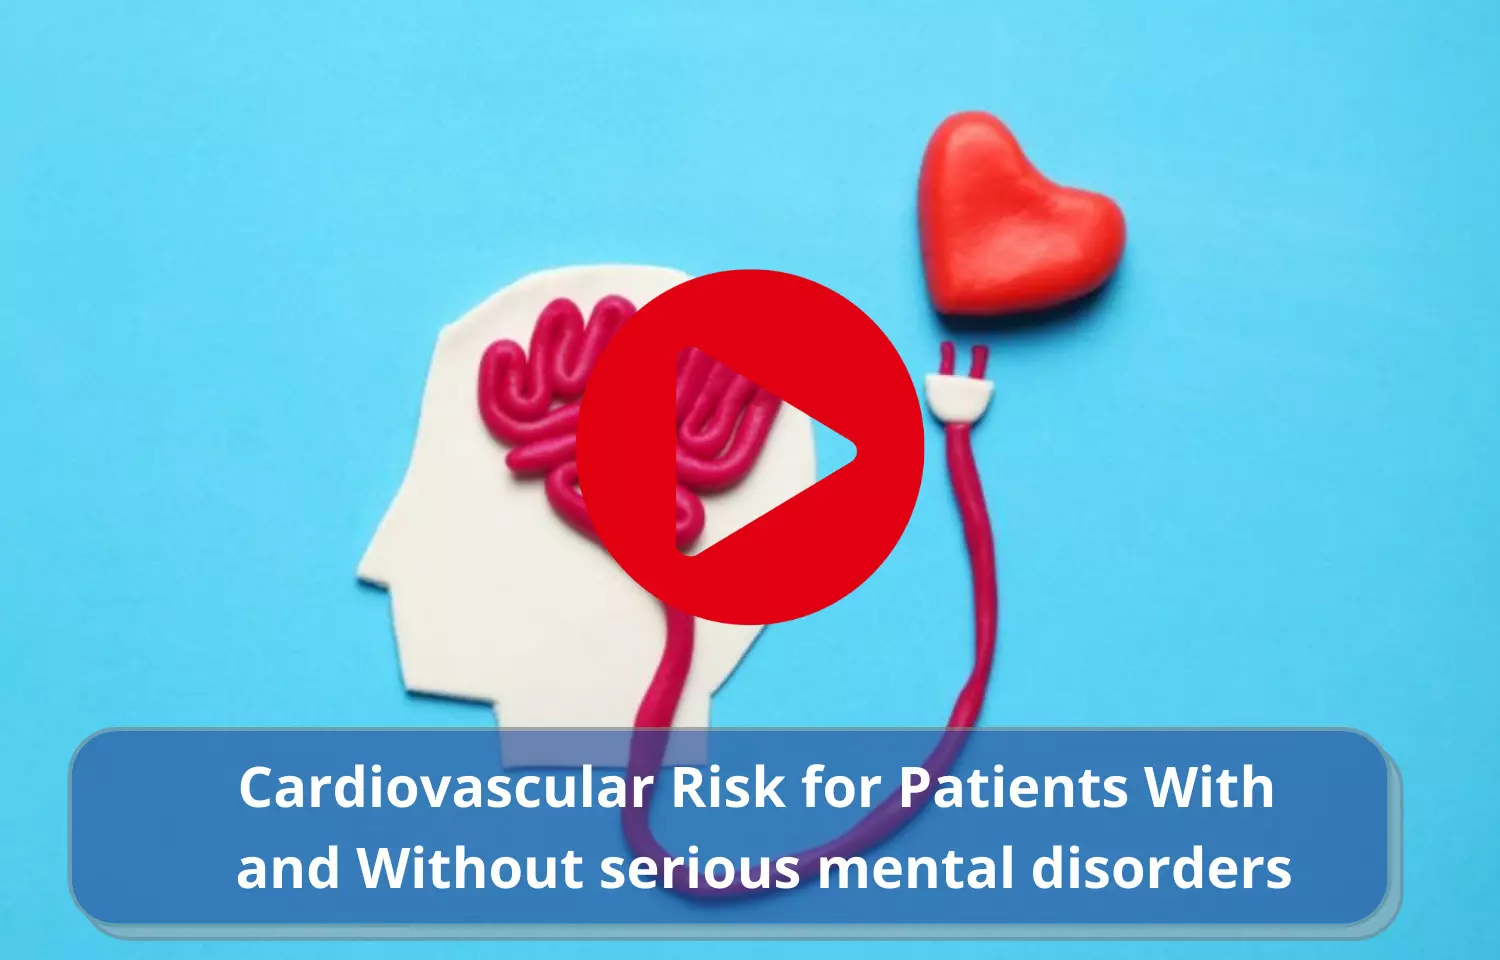 Cardiovascular Risk significantly increases in patients With serious mental disorders